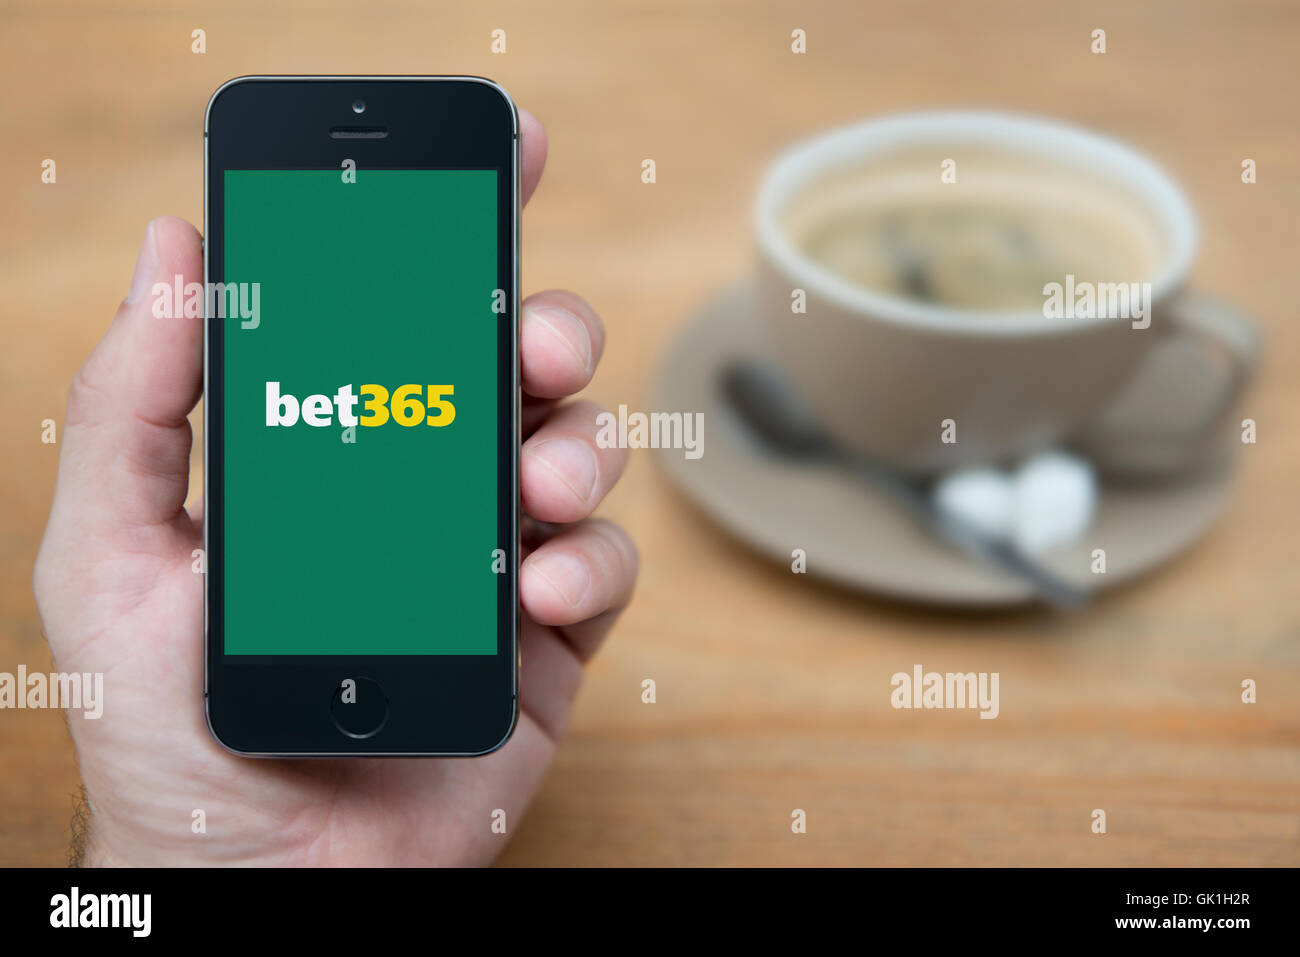 A man looks at his iPhone which displays the Bet365 logo, while sat with a cup of coffee (Editorial use only). Stock Photo